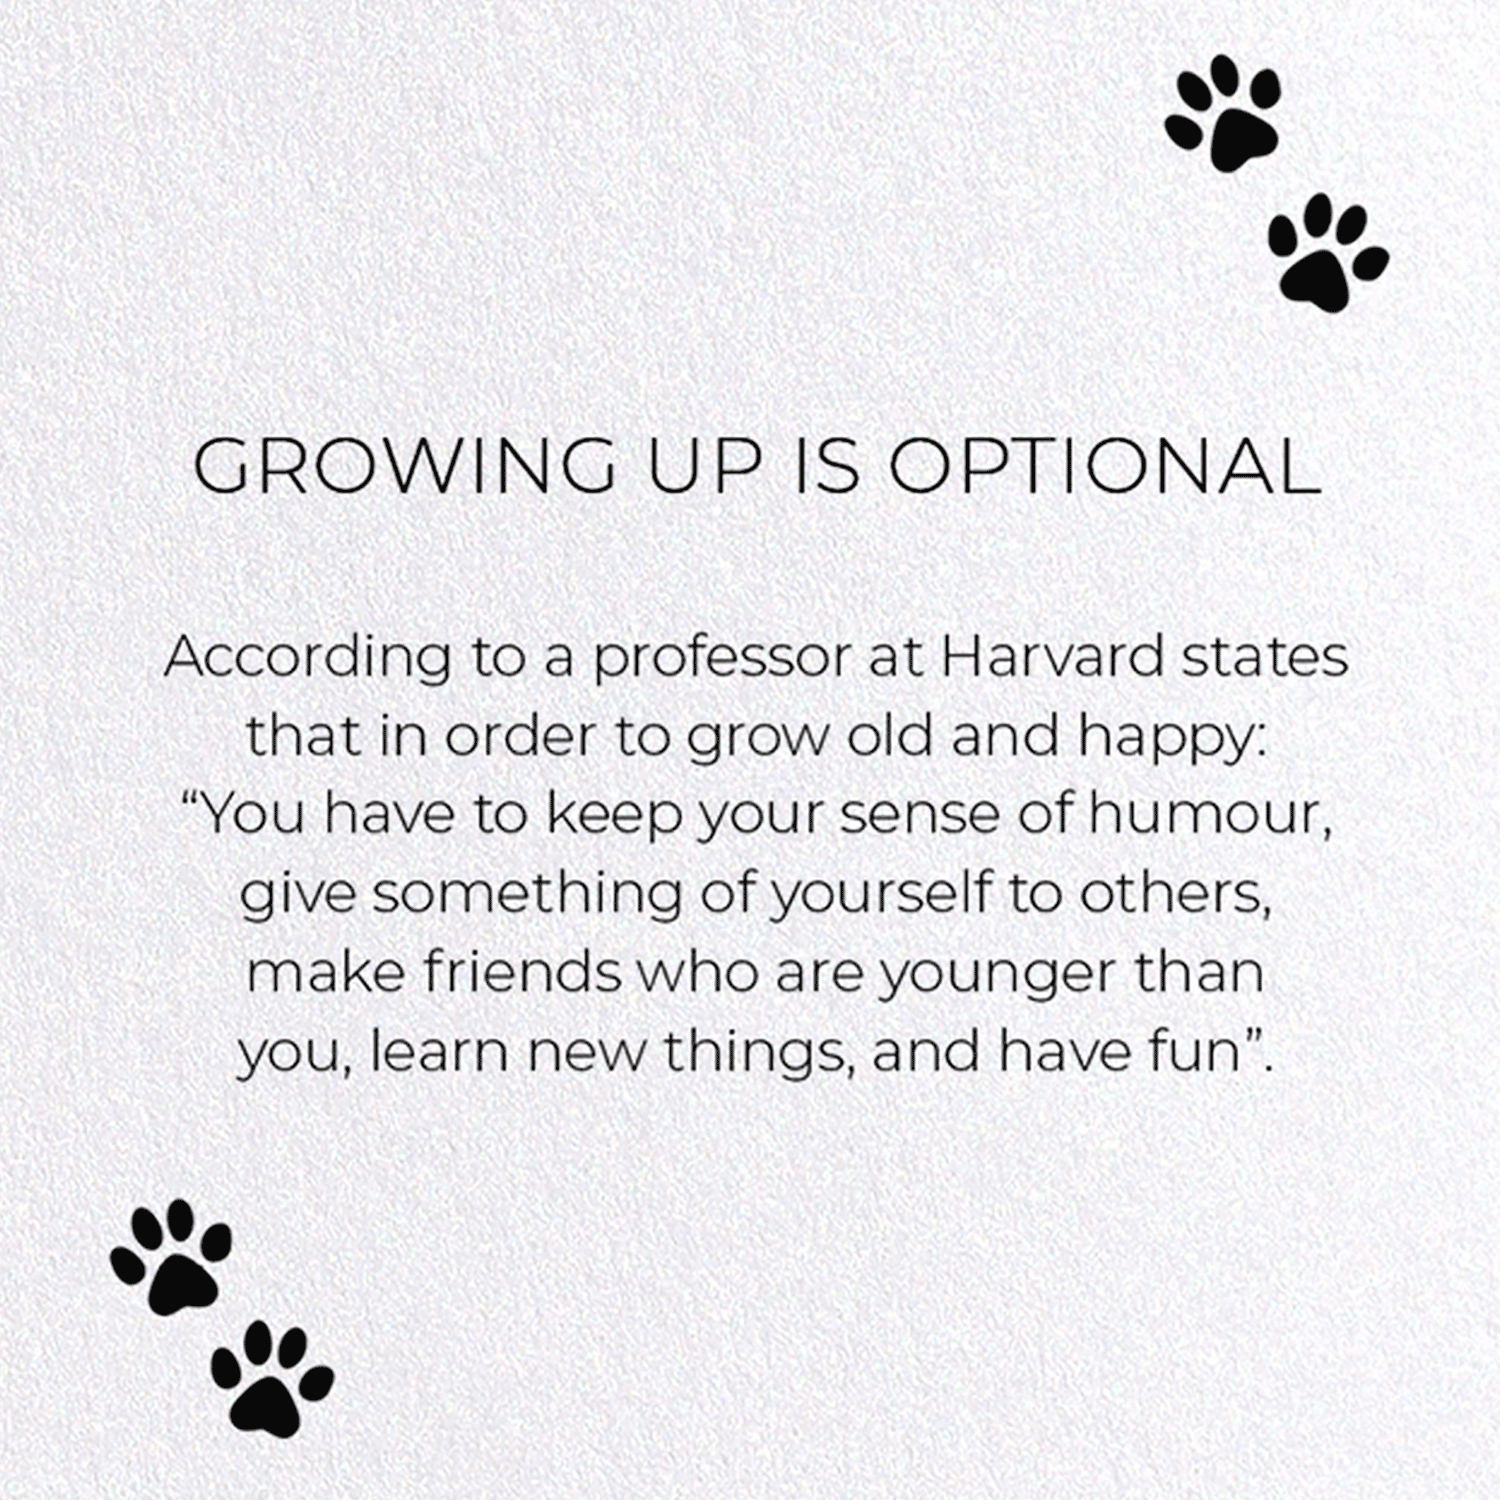 GROWING UP IS OPTIONAL